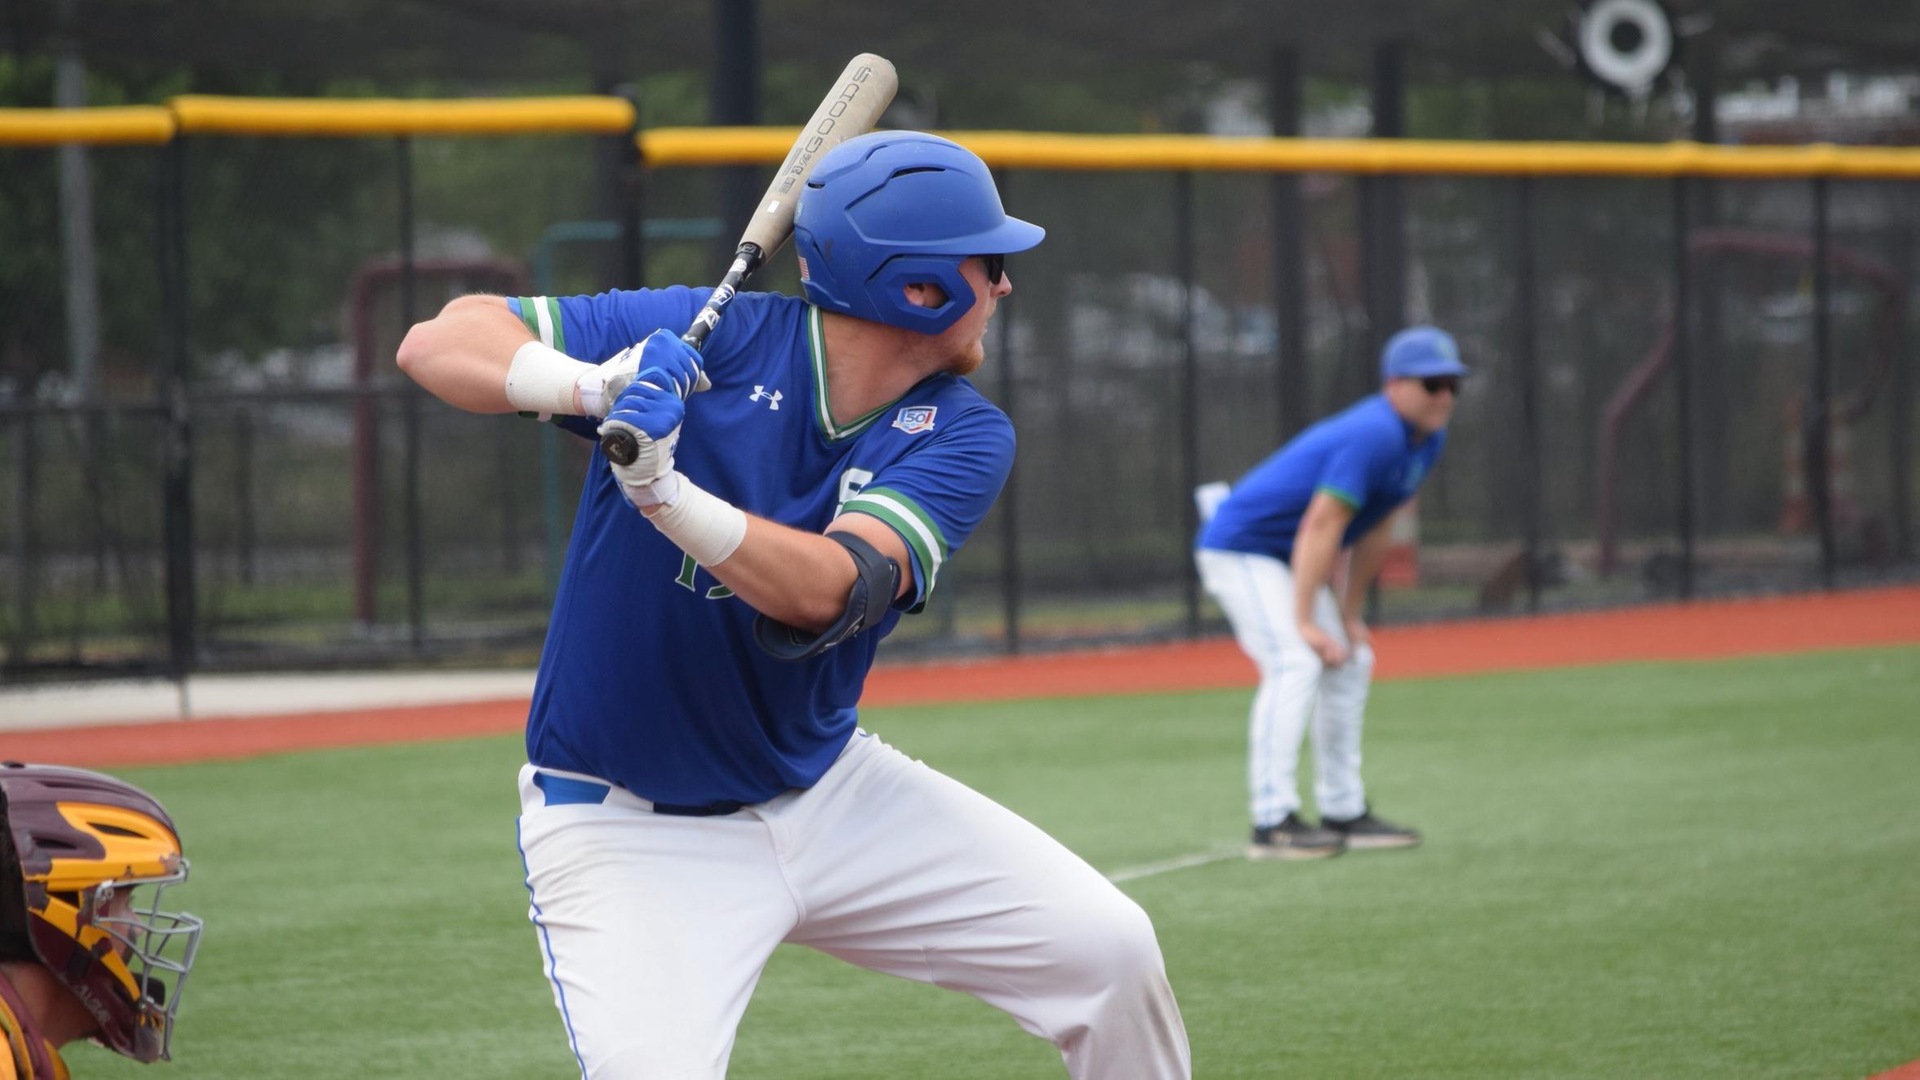 Tyler Cannoe smacked a first-inning home run (his third in last two games) and a second-inning double to drive in five runs as Salve Regina took an early 6-0 lead. (Photo by Ed Habershaw '03M)